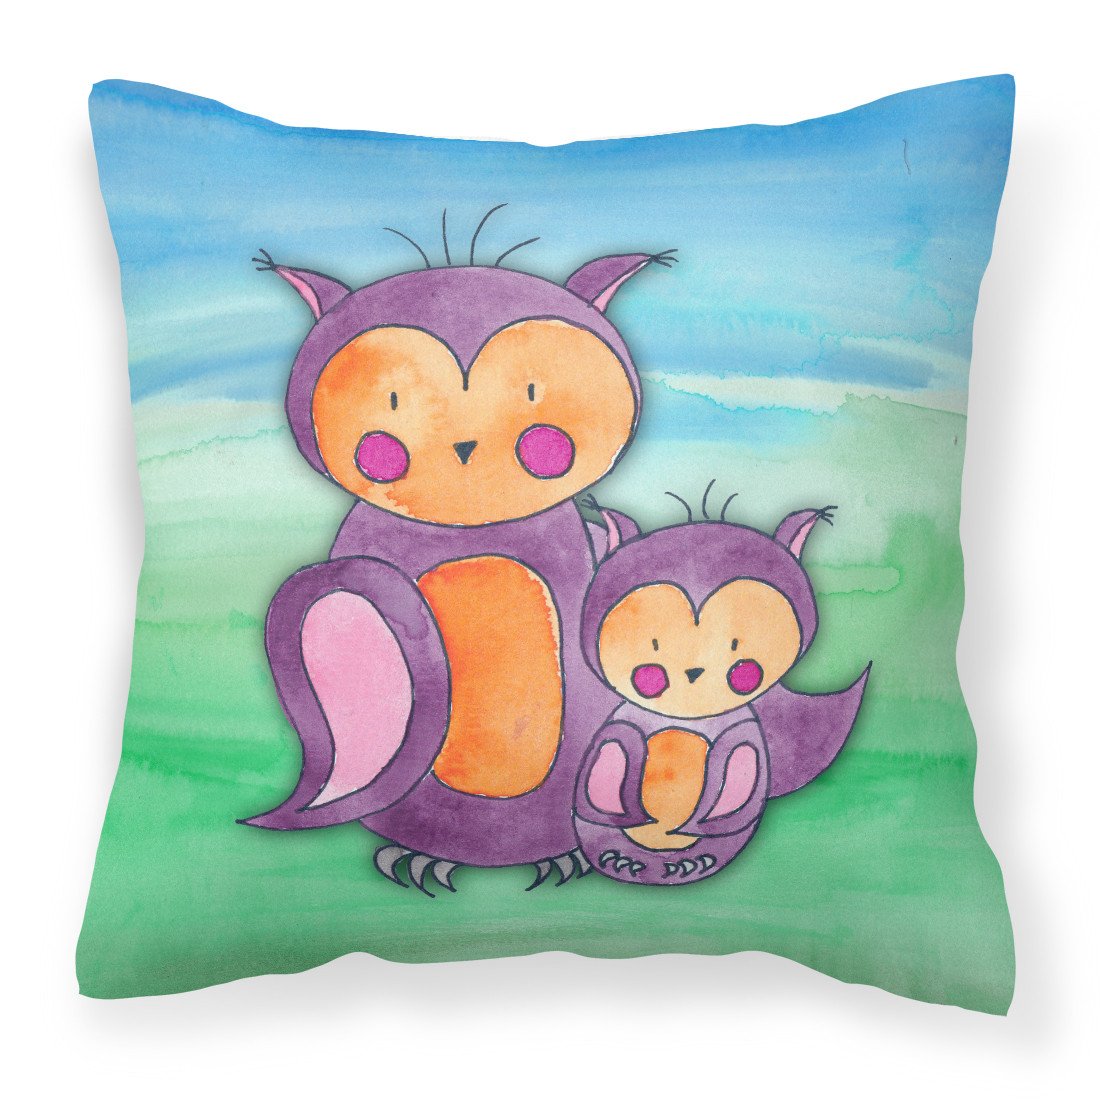 Momma and Baby Owl Watercolor Fabric Decorative Pillow BB7430PW1818 by Caroline's Treasures